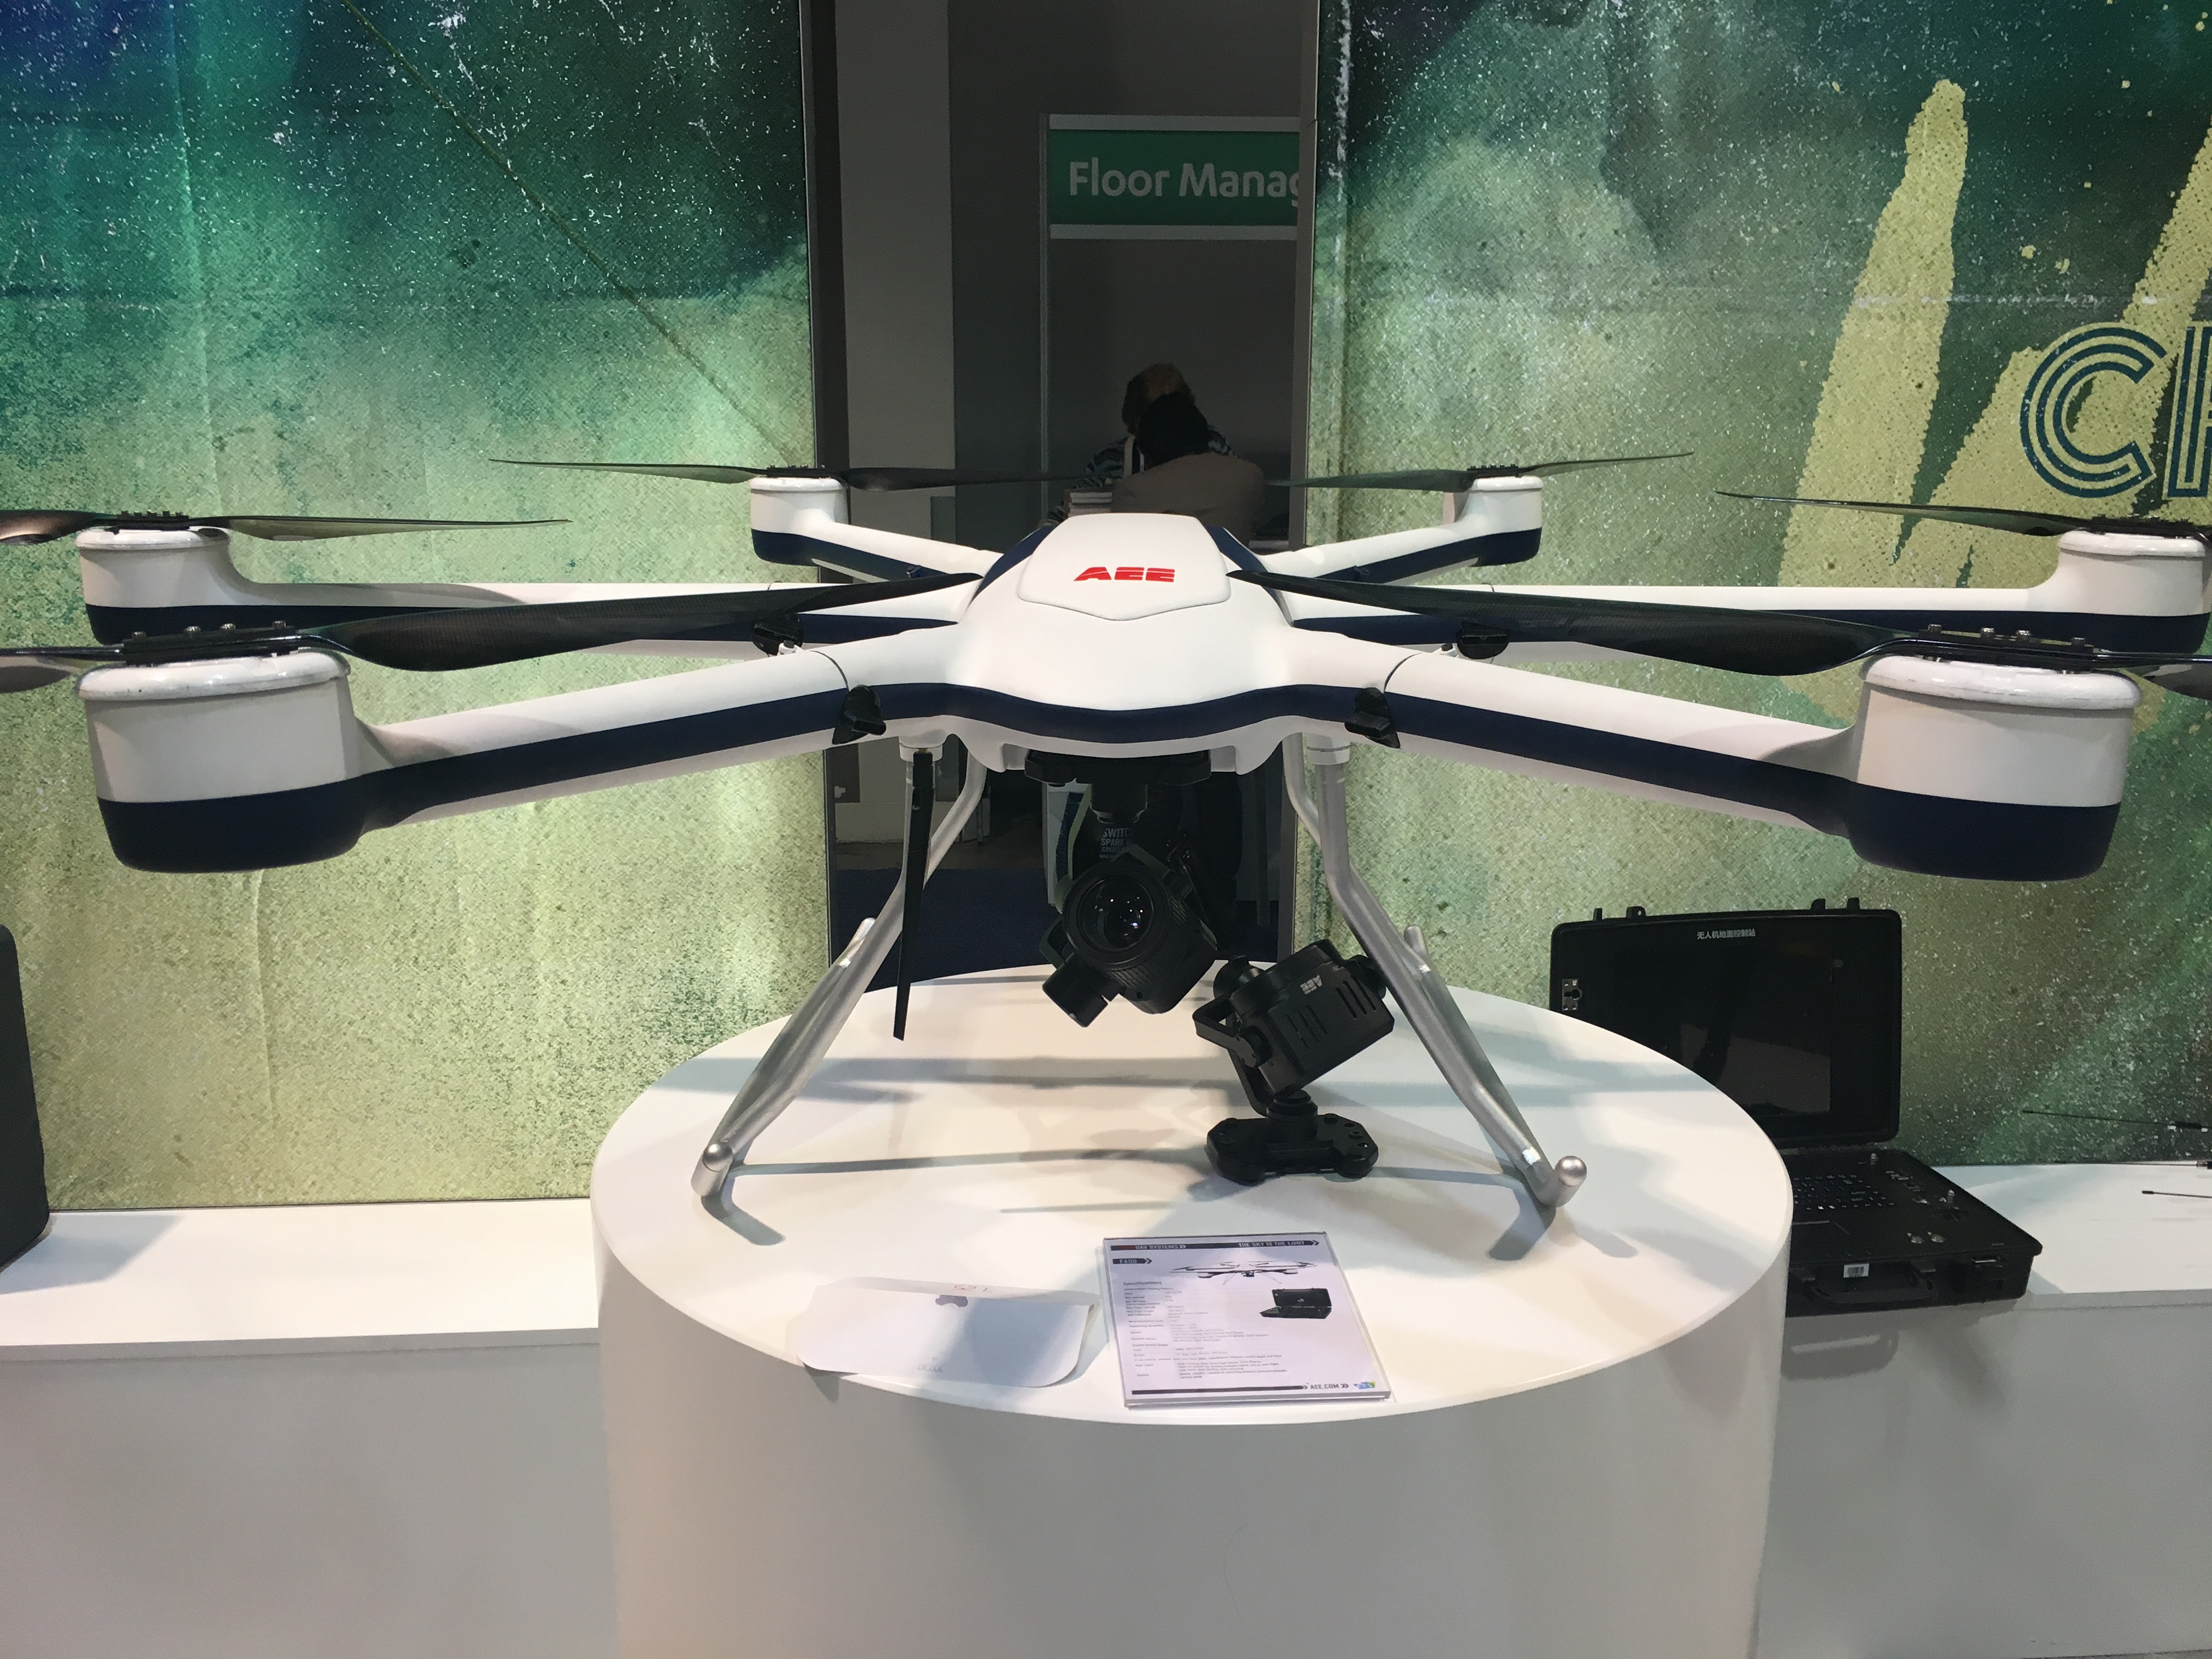 AEE Drone at CES 2017